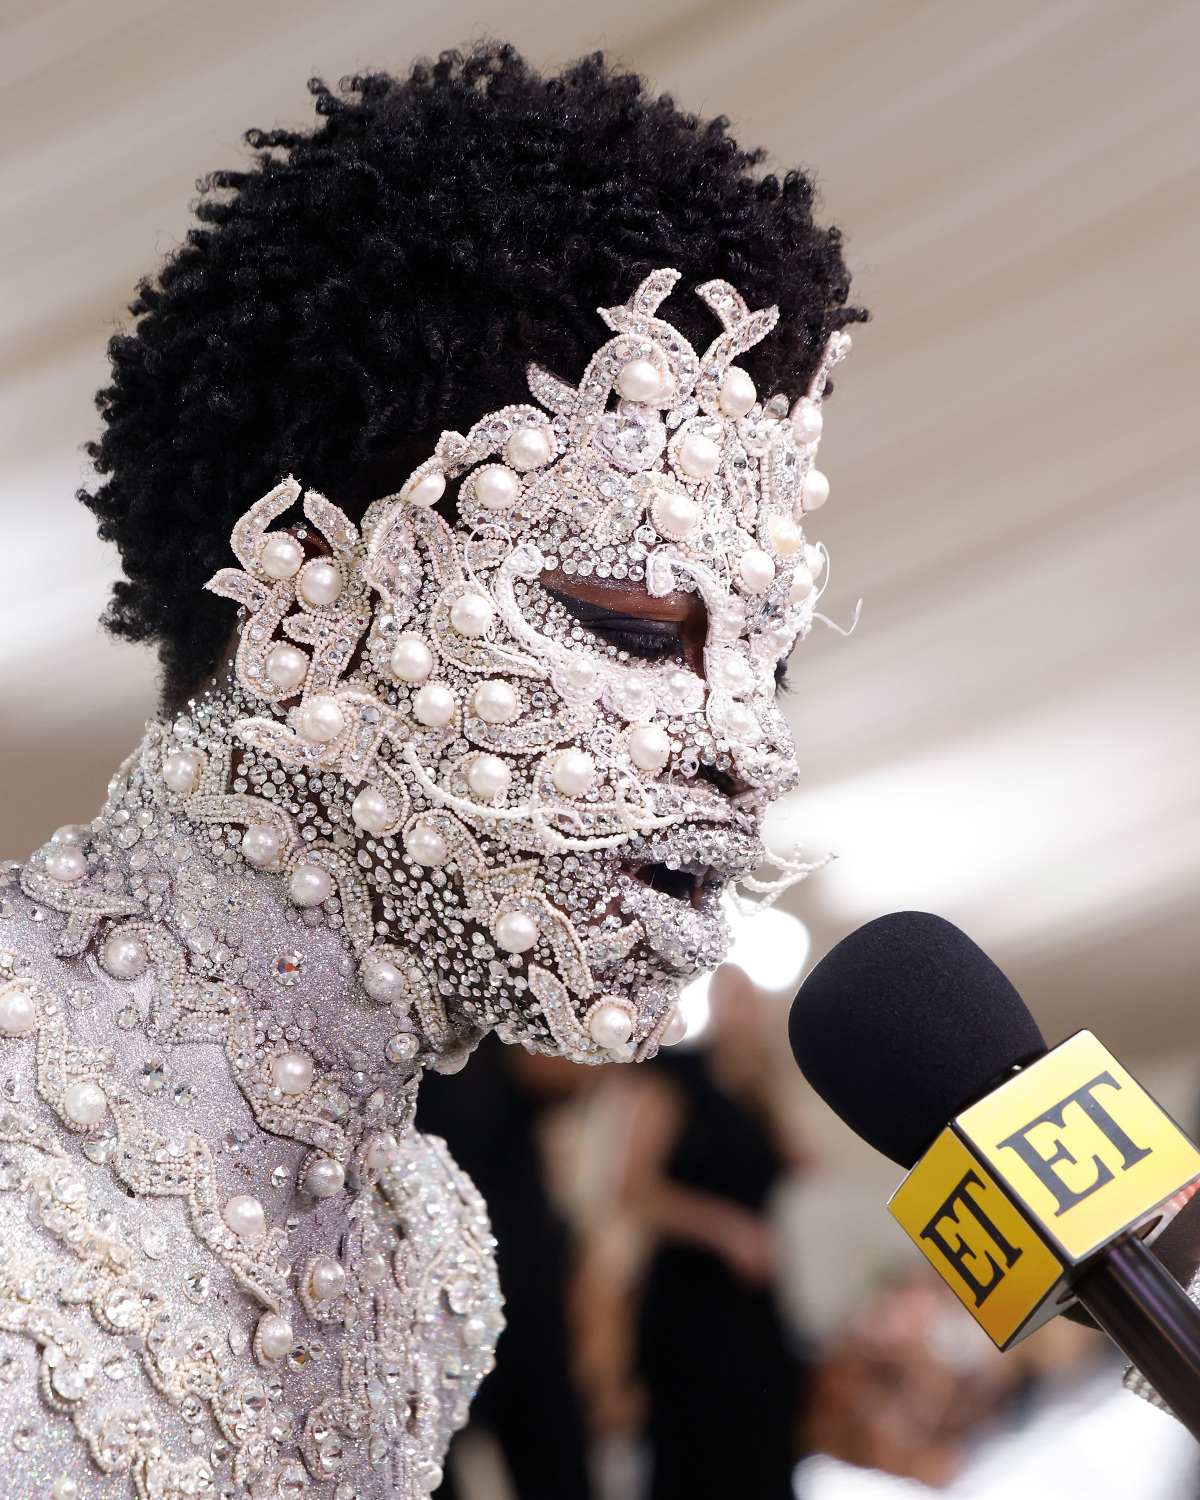 Lil Nas X's Met Gala Body Paint Took Nearly 12 Hours to Apply